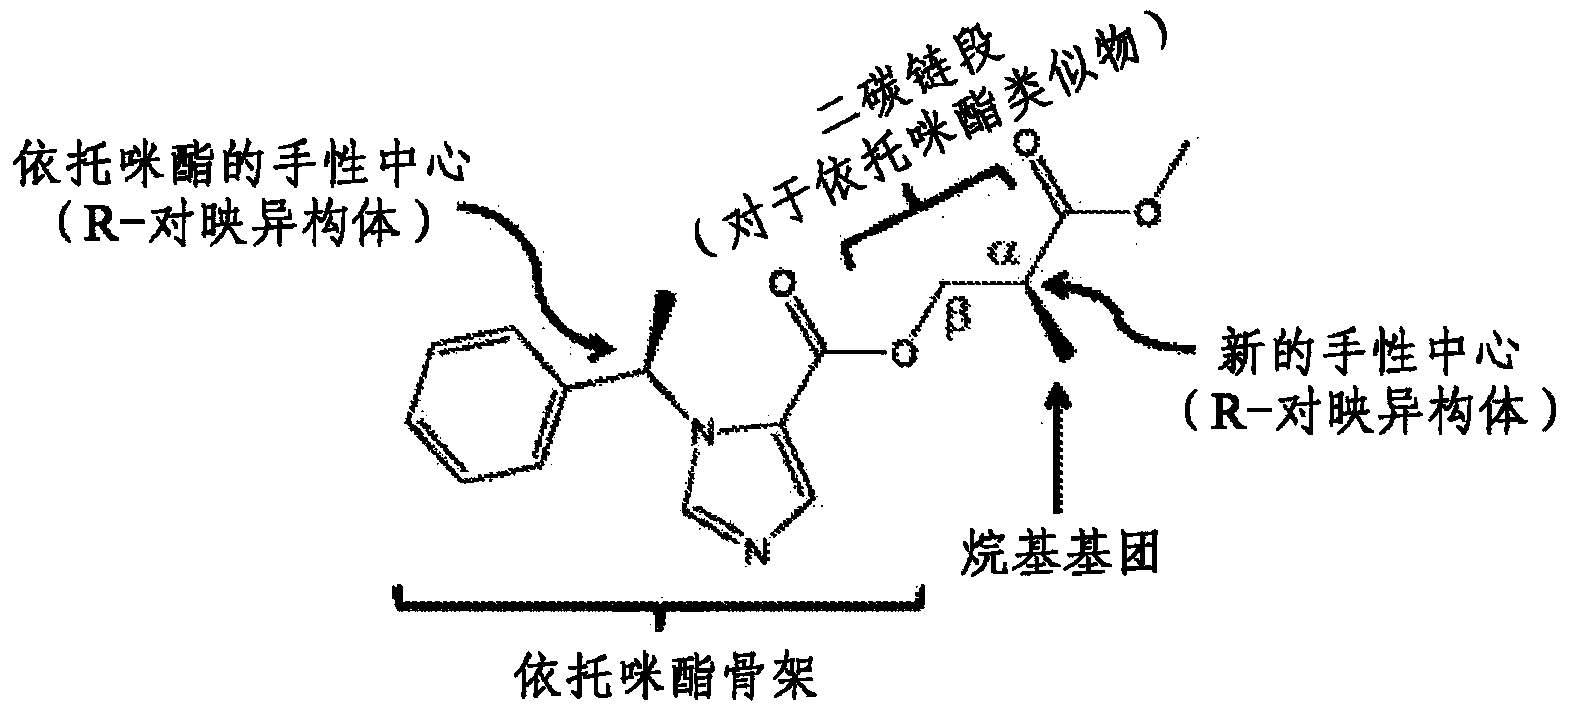 Anesthetic compounds and related methods of use